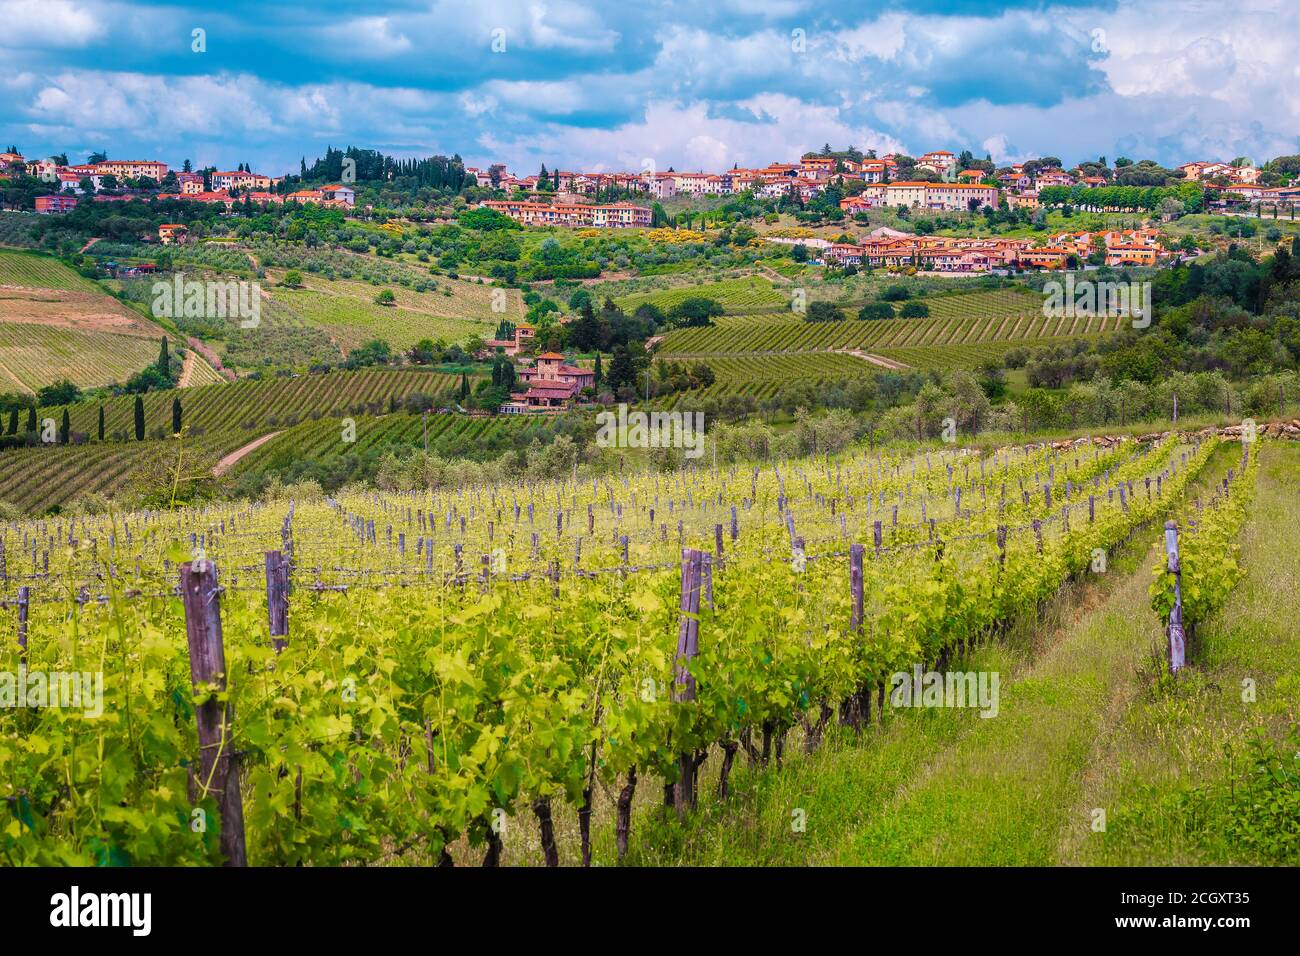 Stunning Panzano in Chianti on the hill and beautiful grape plantation. Gardens and vineyards in Tuscany, Italy, Europe Stock Photo